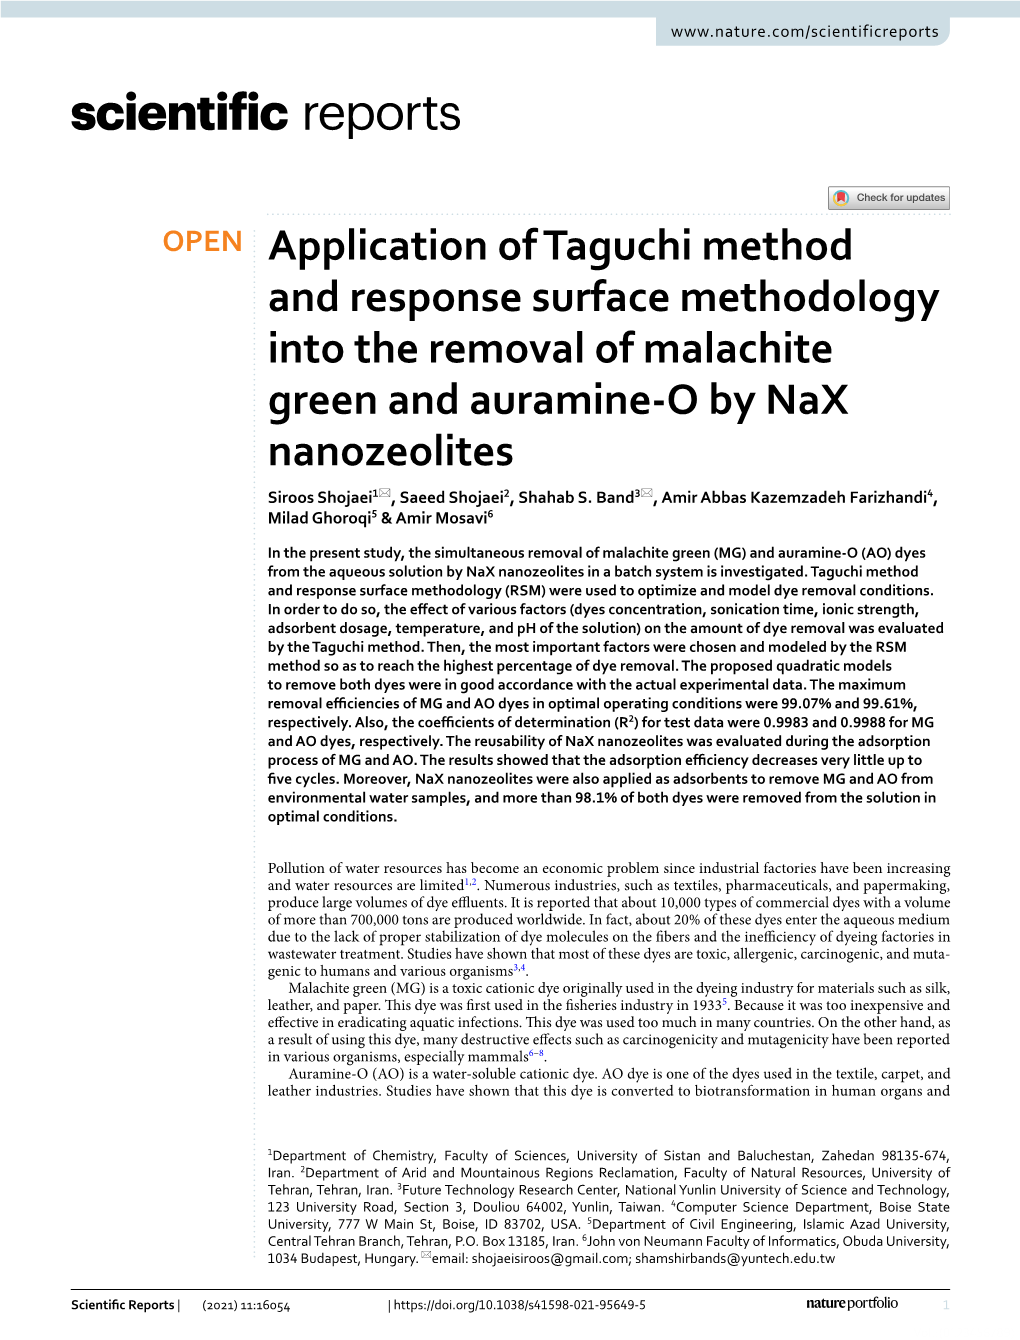 Application of Taguchi Method and Response Surface Methodology Into